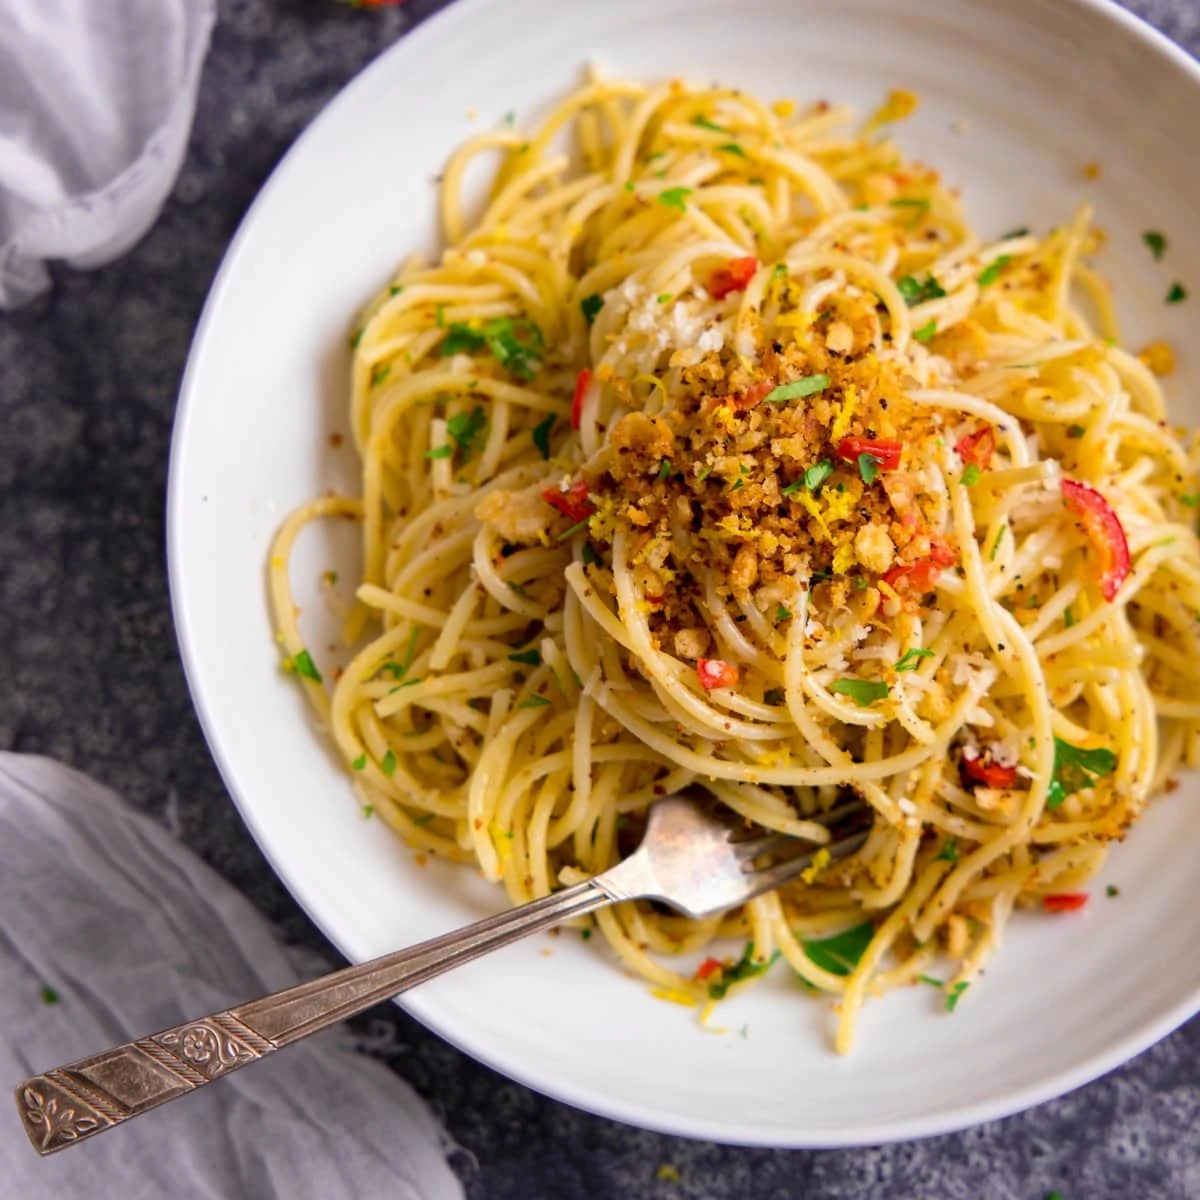 Spaghetti with garlic breadcrumbs and red chilli on a white plate.